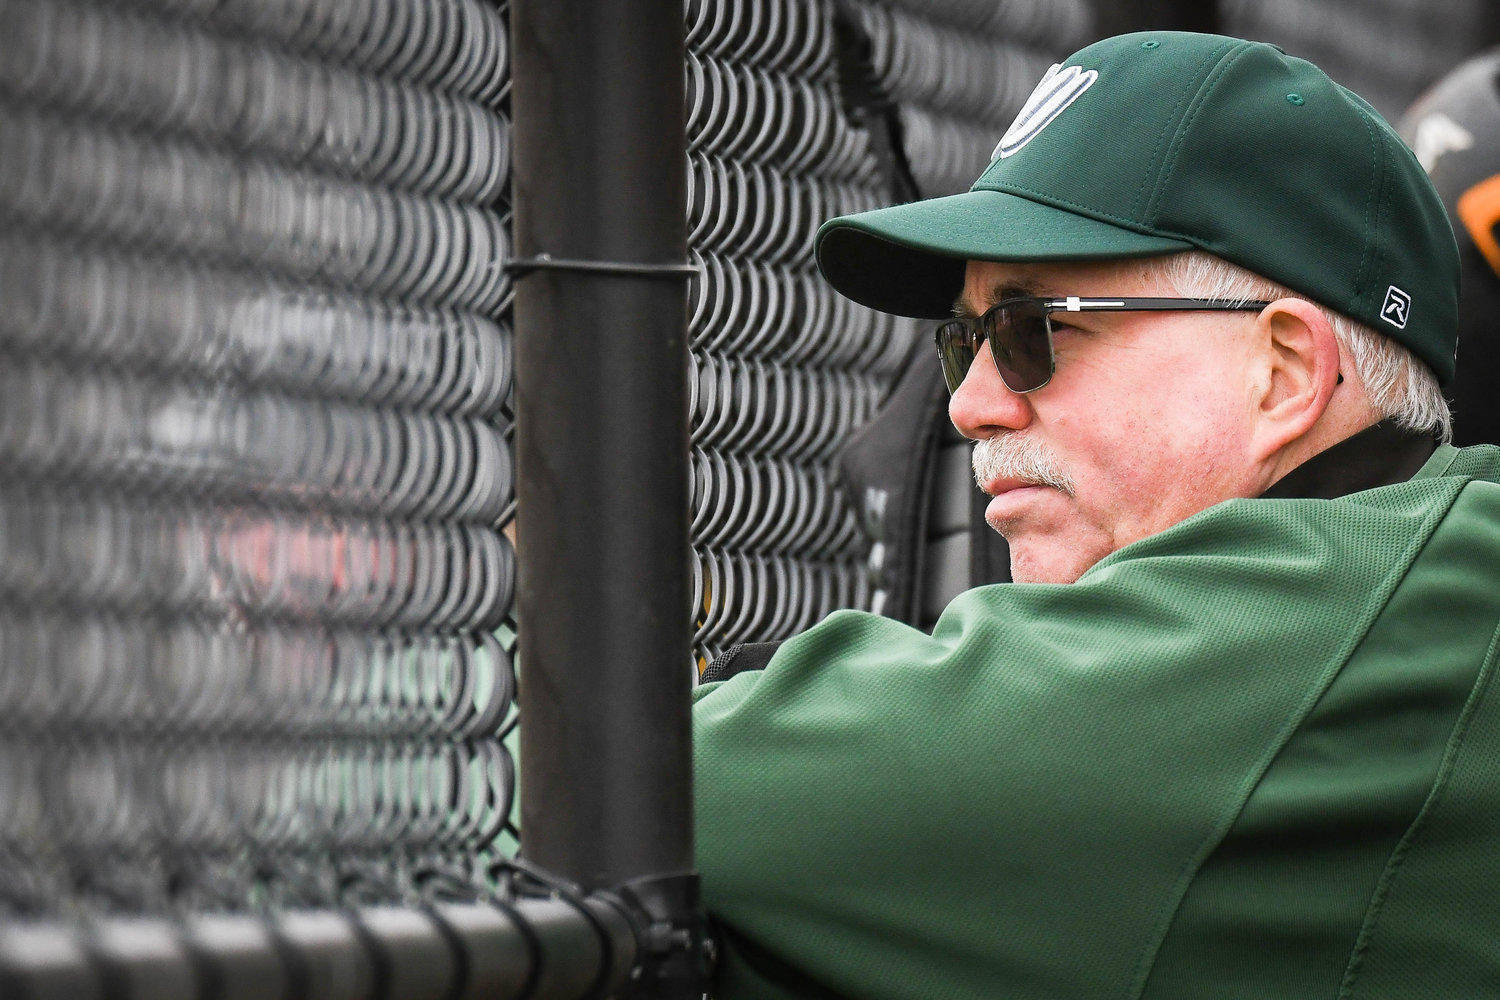 Westmoreland assistant coach Gerry Schaller looks on the field from the dugout during the game against Adirondack on Monday.